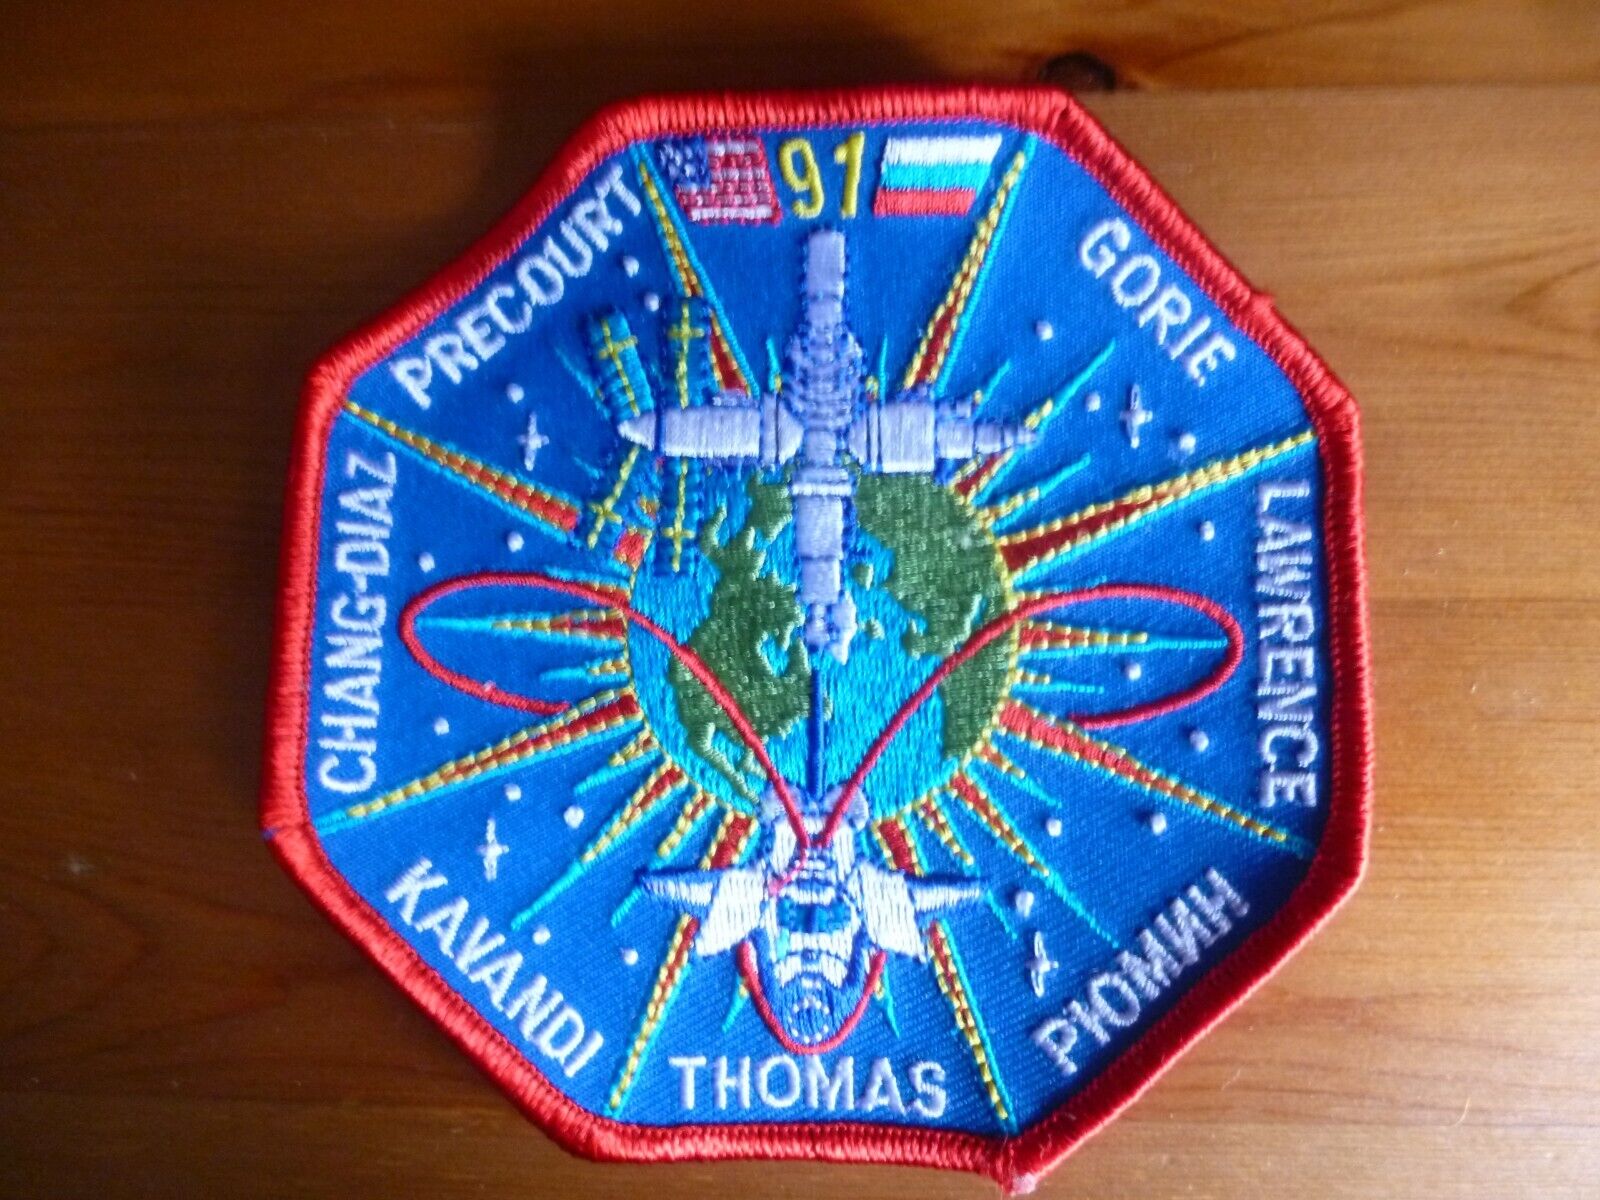 NASA SPACE SHUTTLE Patch 1998 STS-91 Mission Kennedy Center Final MIR docking